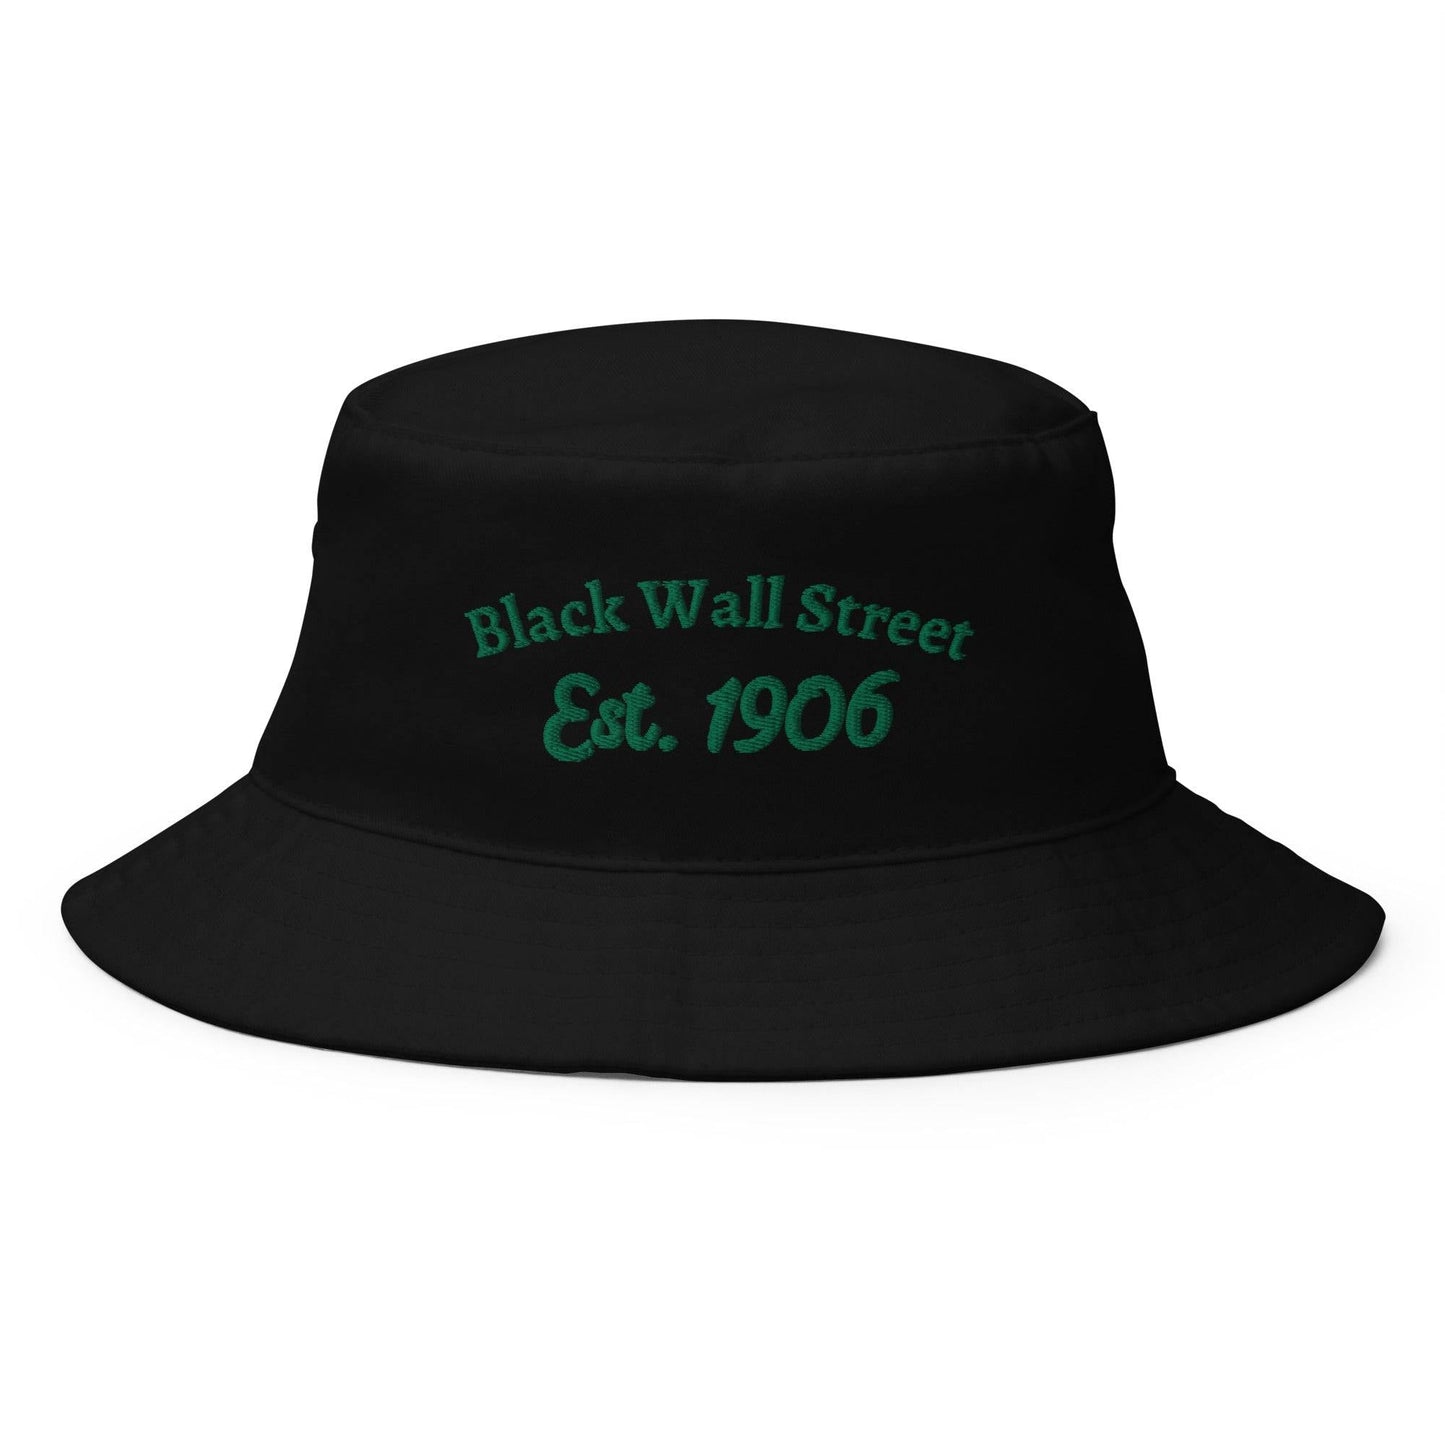 Black Wall Street 1609 Embroidered Bucket Hat